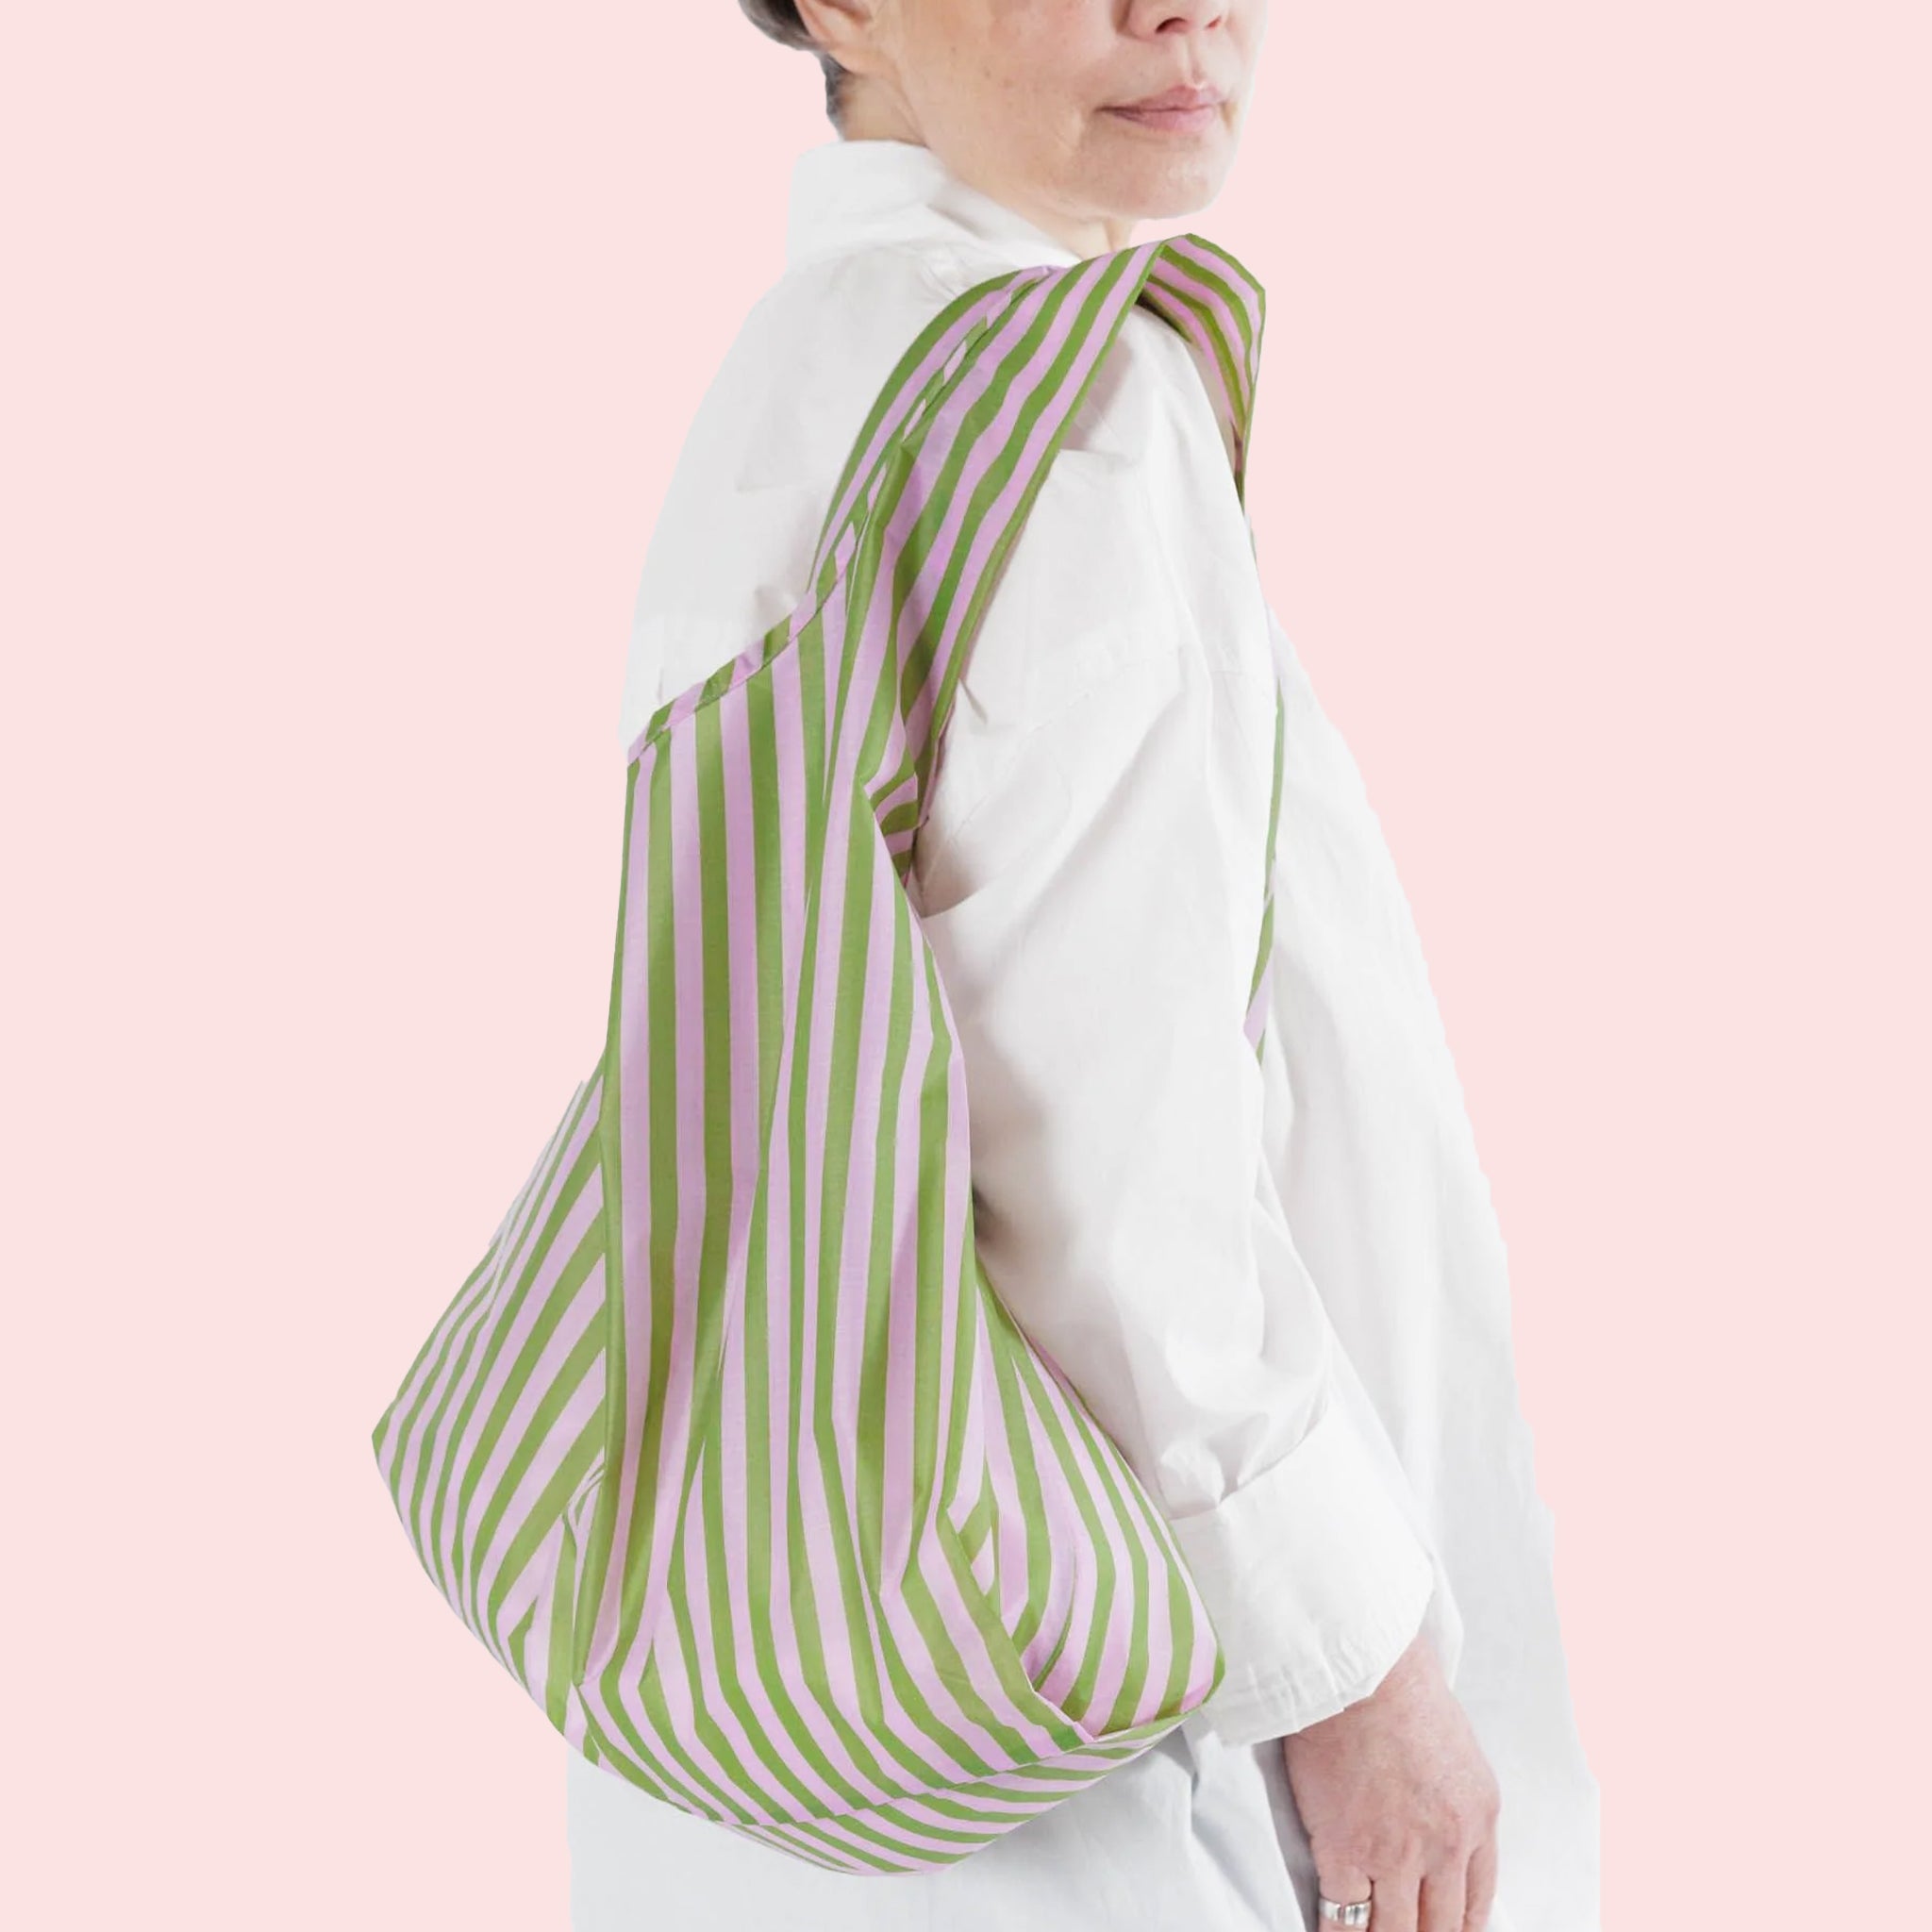 A light pink and green striped nylon reusable tote bag.